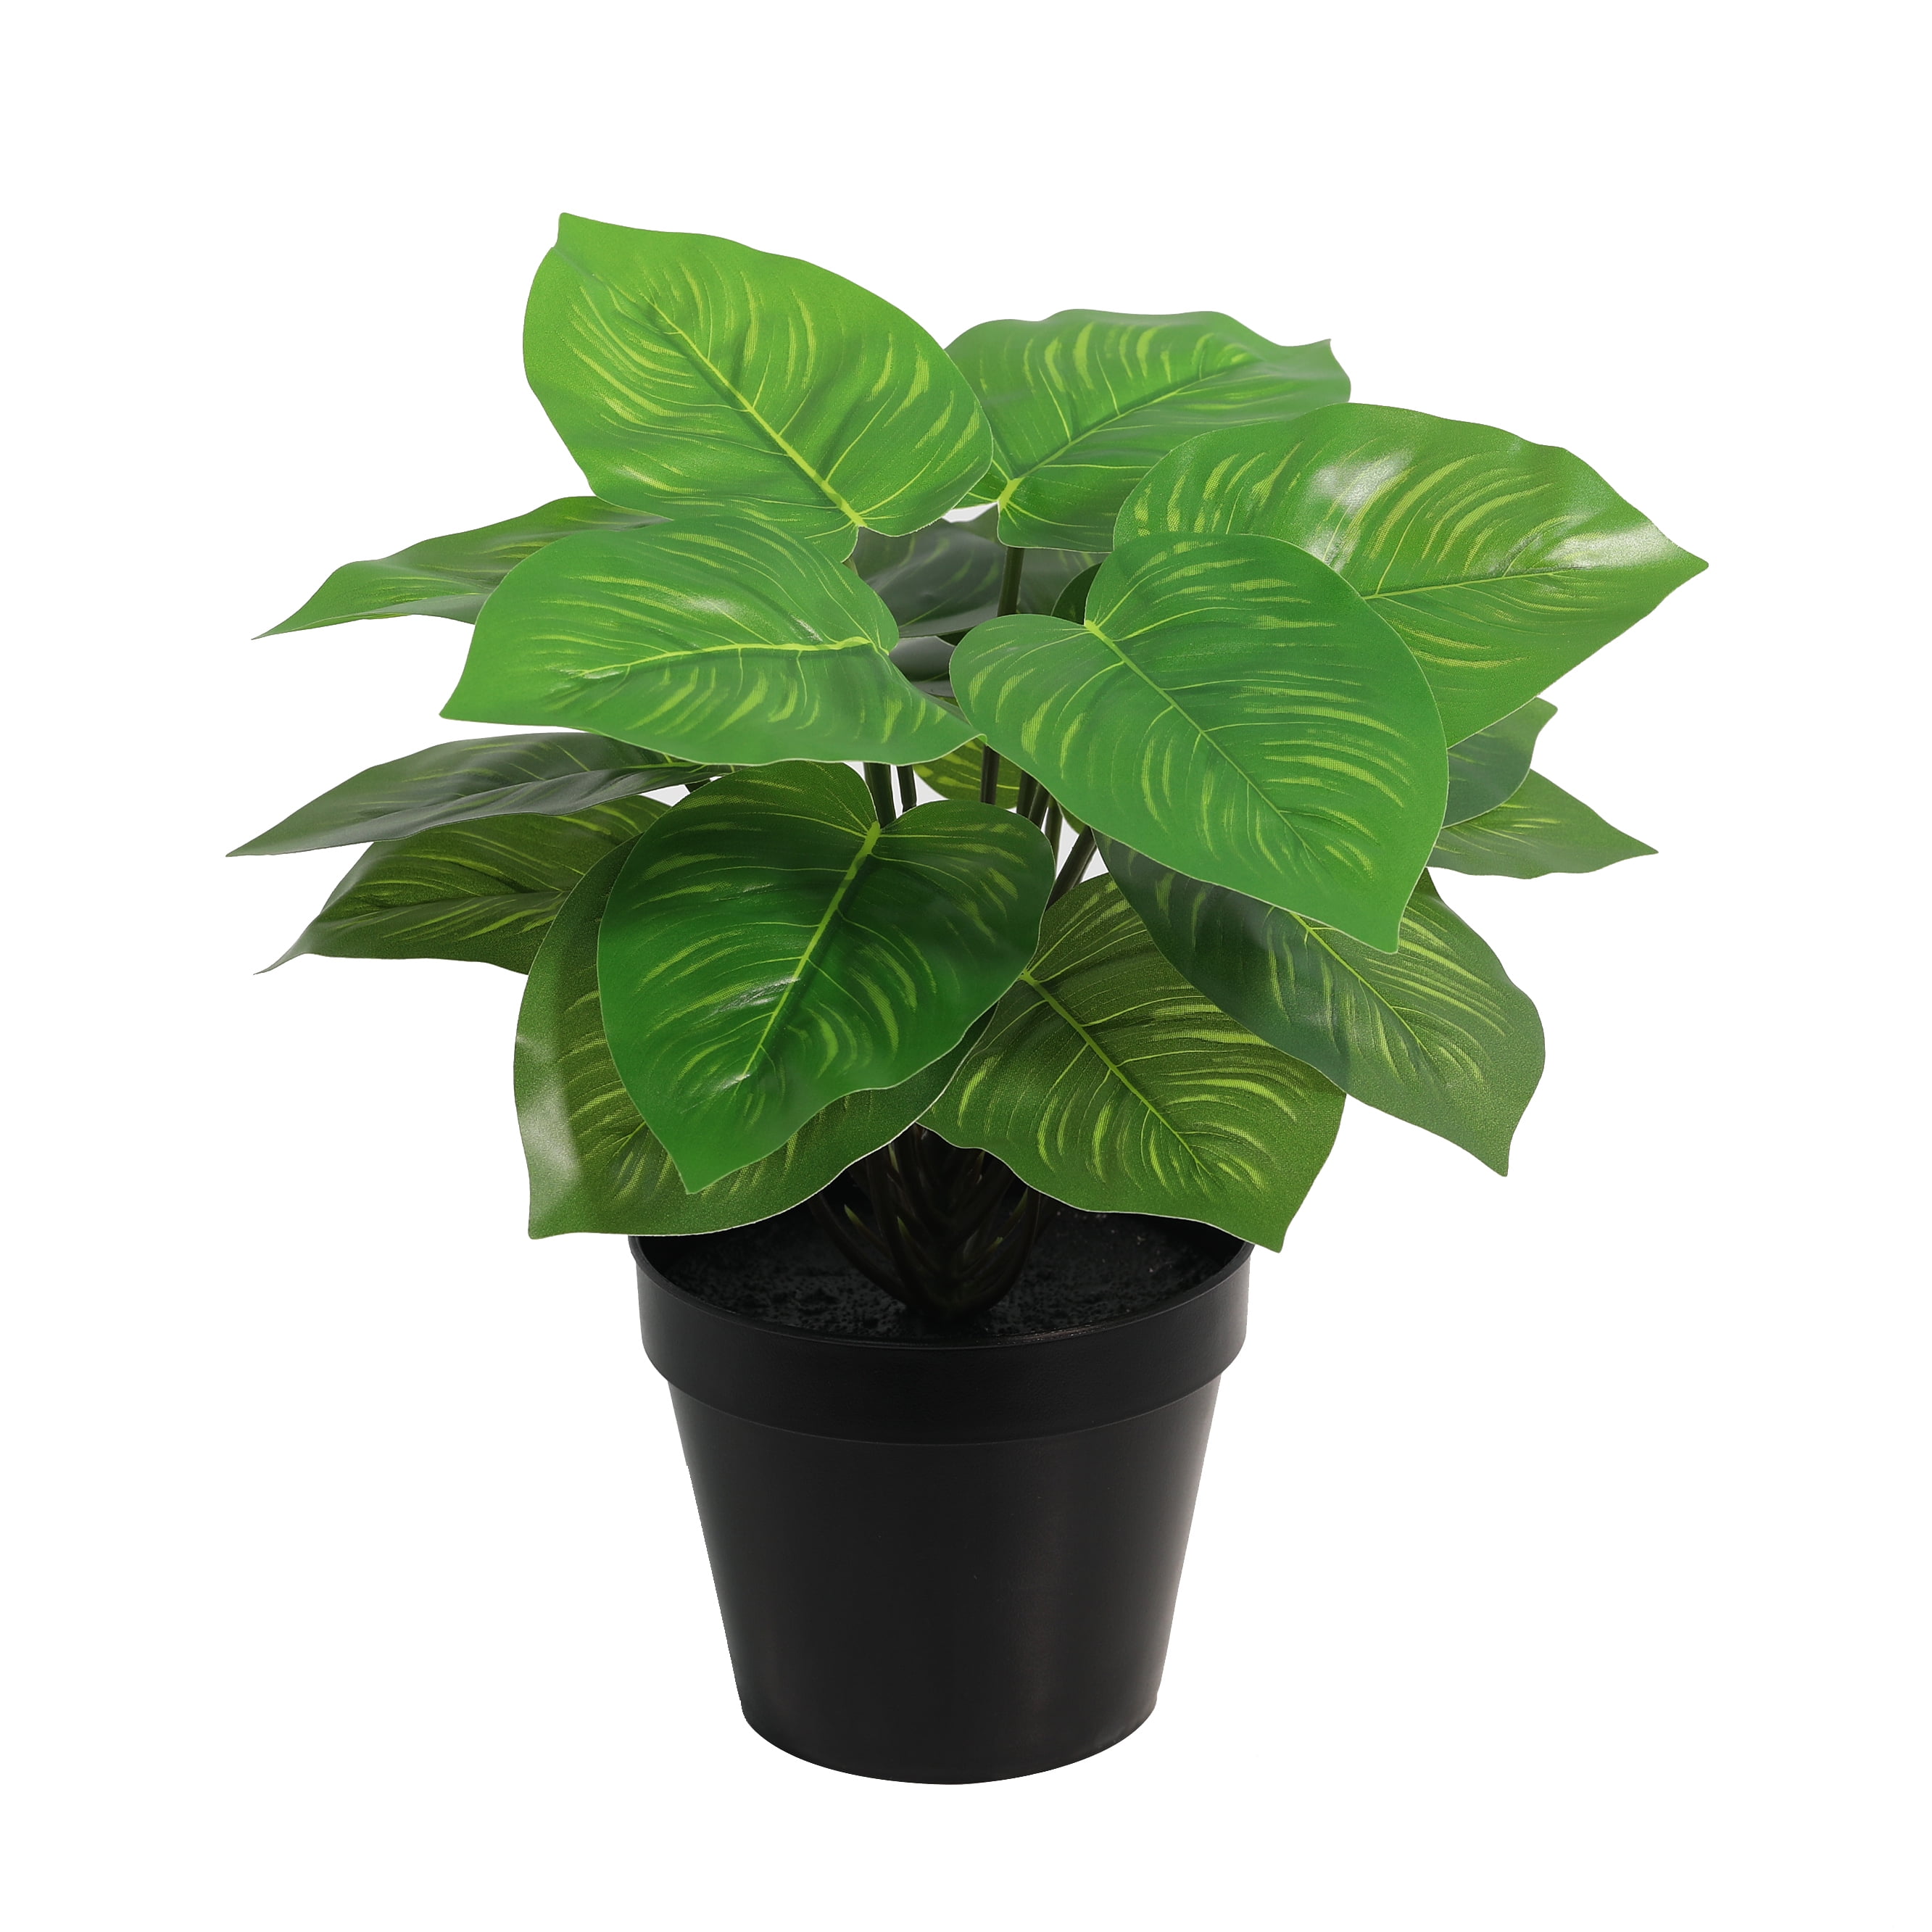 Mainstays 10" Tall Artificial Potted Green Caladium Plant in Black Pot